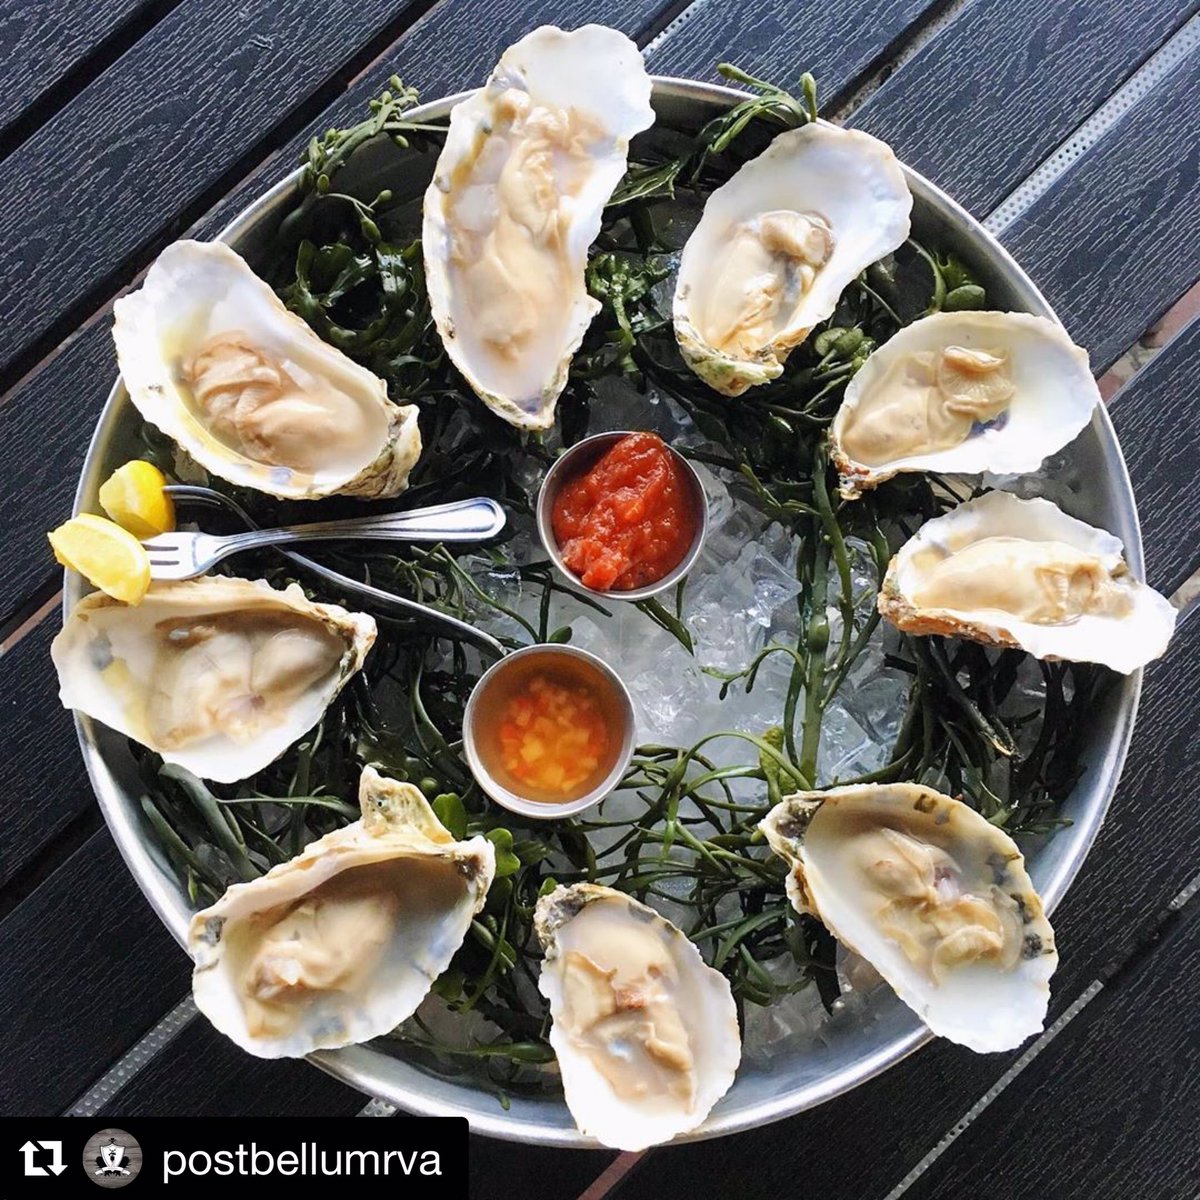 Celebrate the new year with us and treat yourself to fresh, local oysters on the half shell from Big Island Oyster Co.! Reservations can be made by visiting Resy or our website! #rva #rvadine #rvanye #rvaoysters #localoysters #newyearseve #bigislandoysters